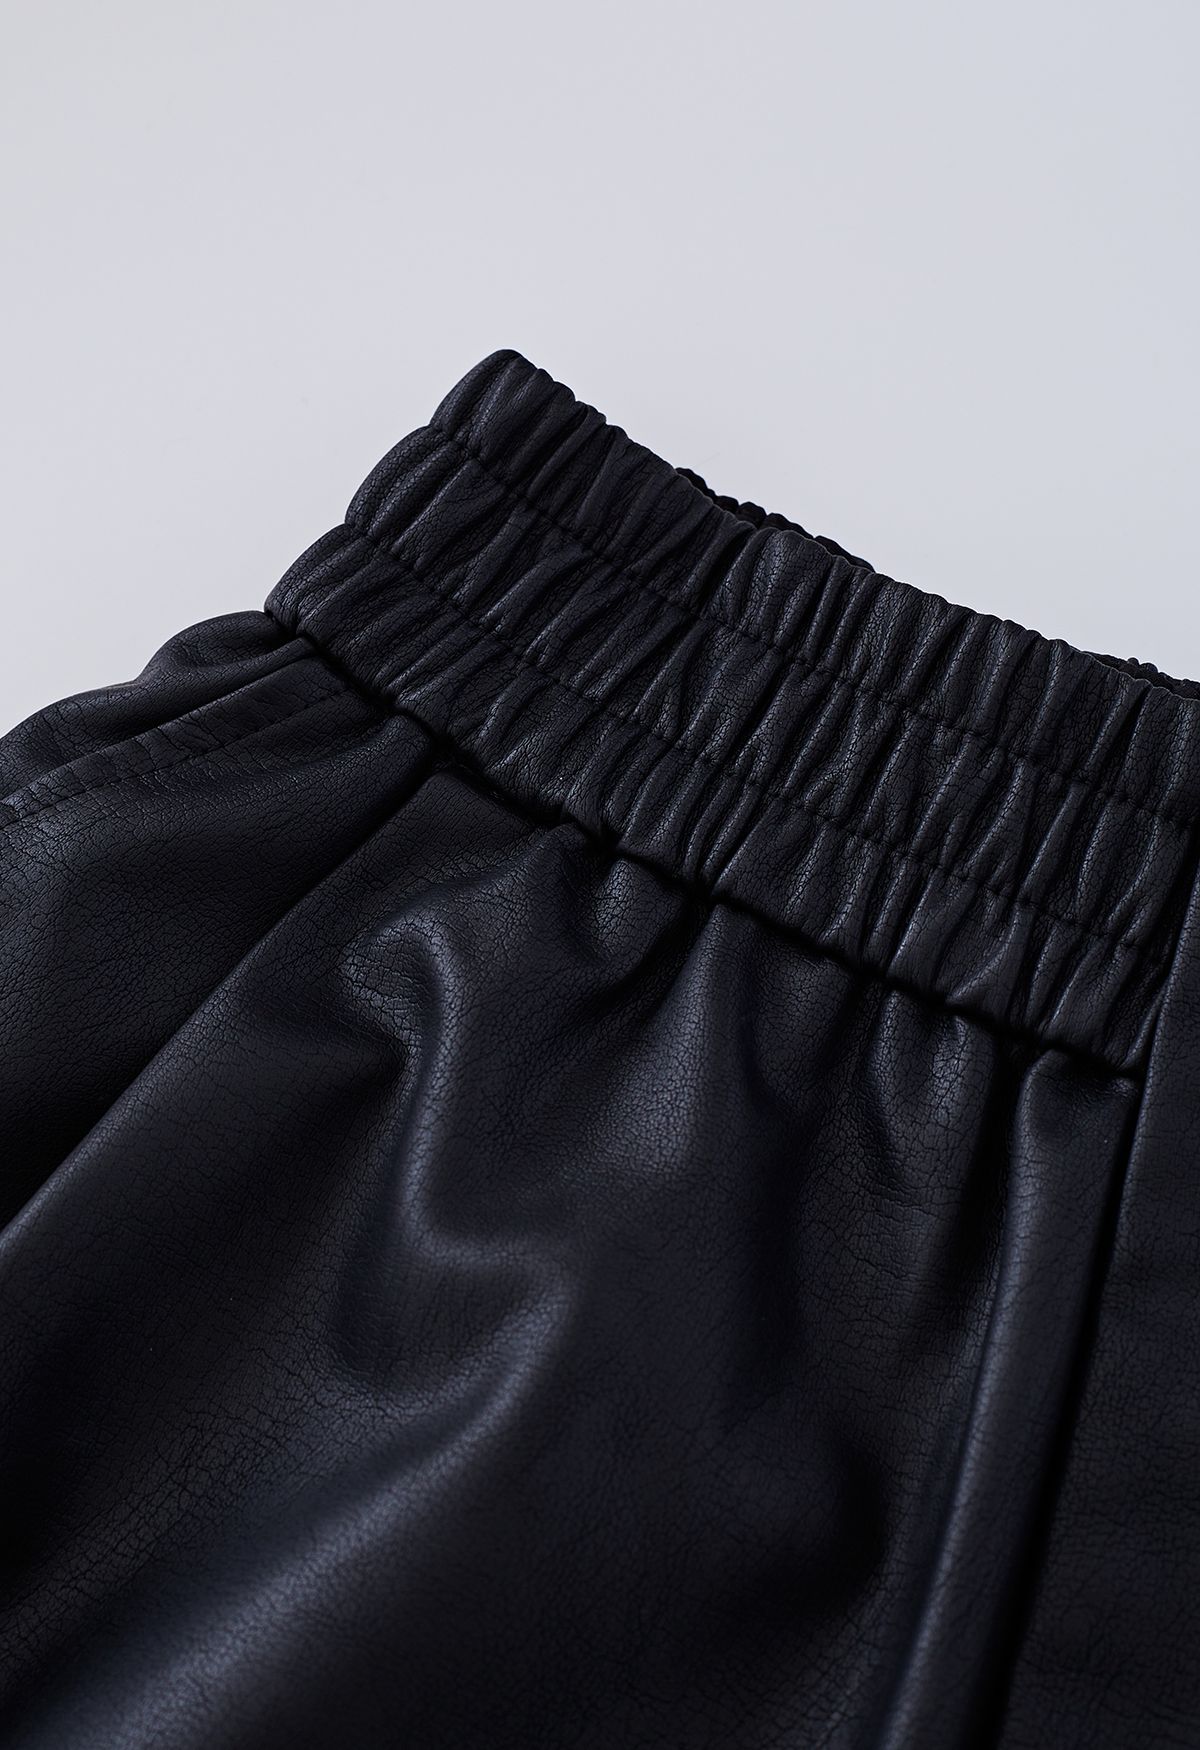 Textured Buttoned Faux Leather Shorts in Black